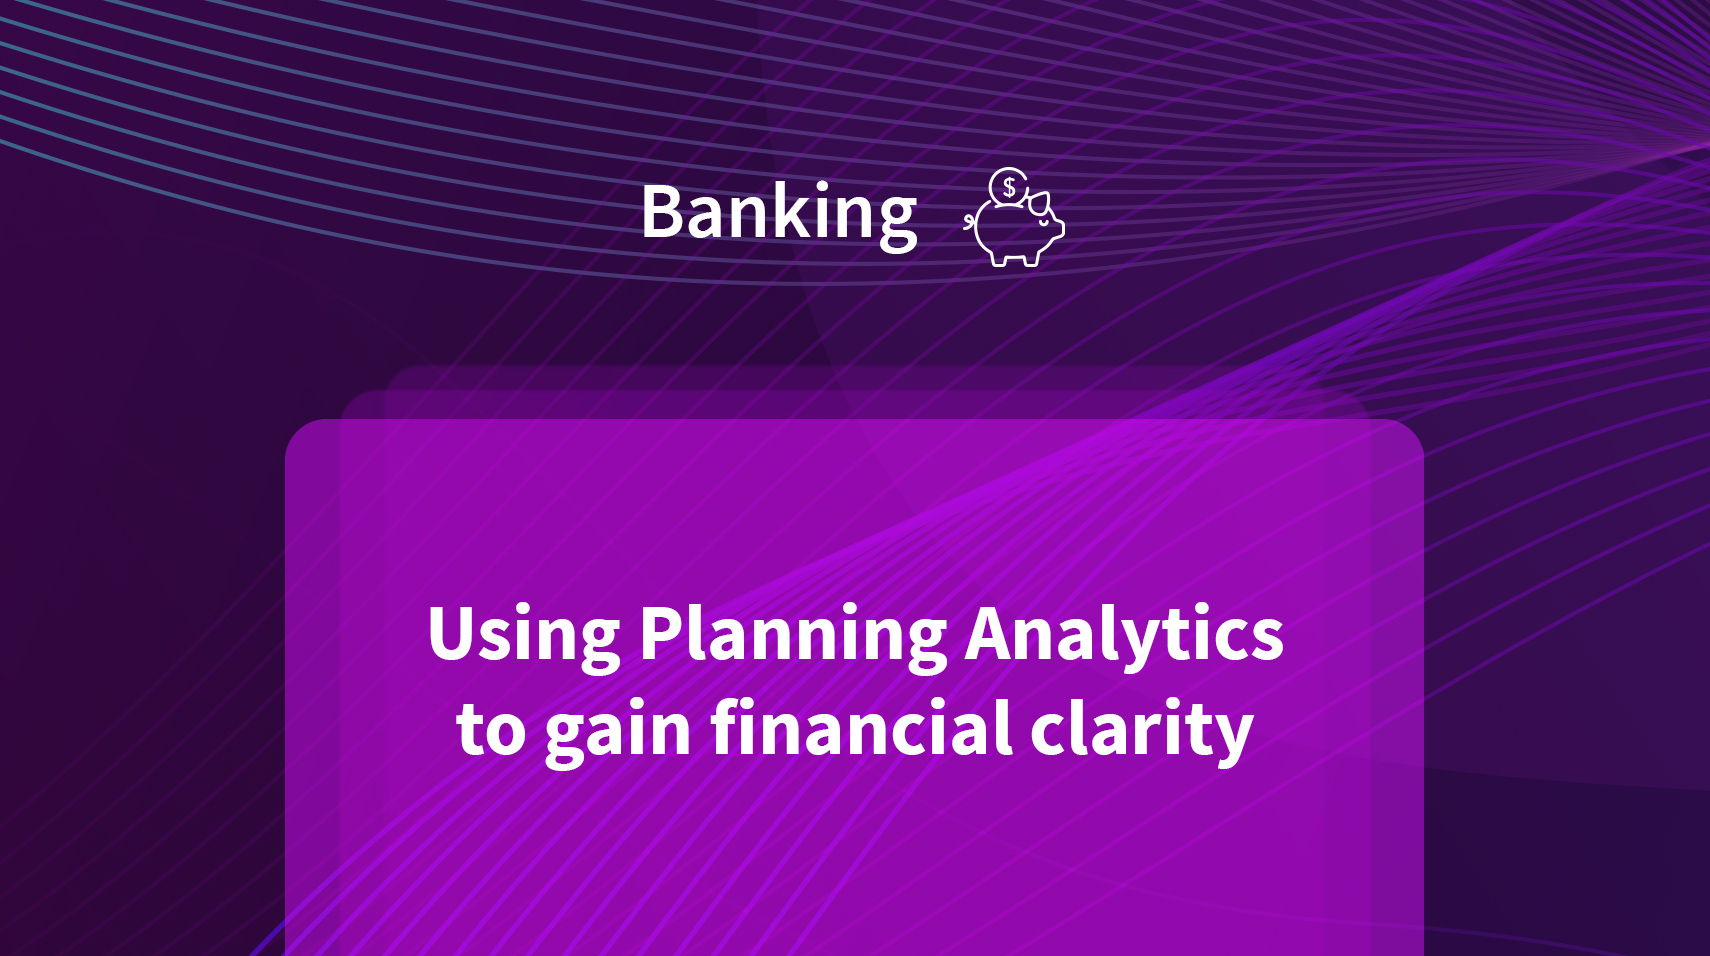 Using Business Intelligence to gain financial clarity